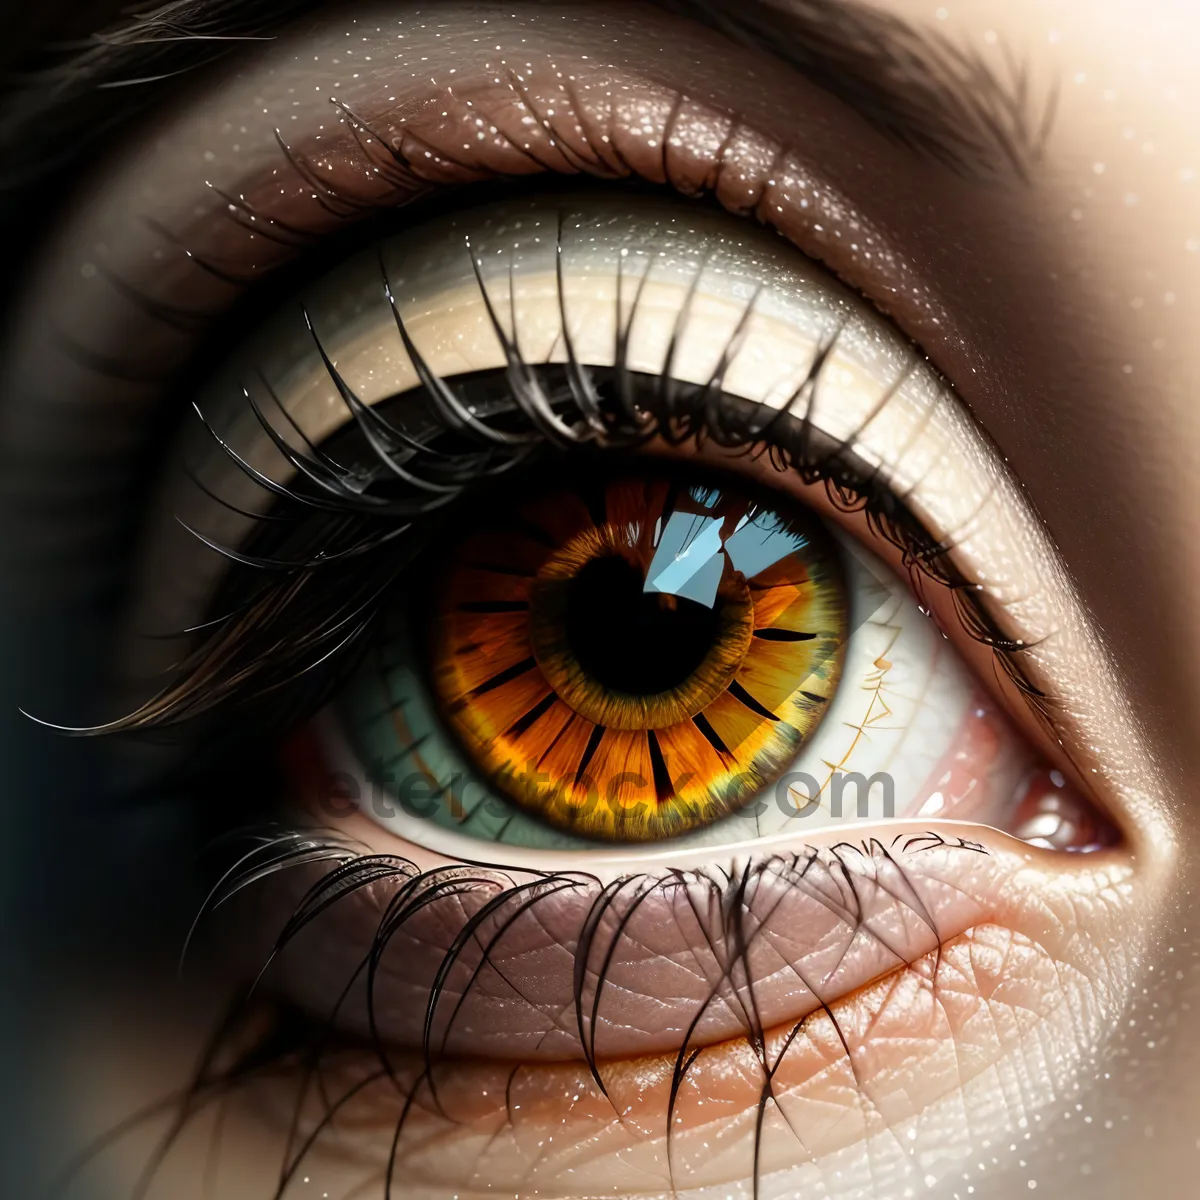 Picture of Closely Examining Human Eyeball and Iris